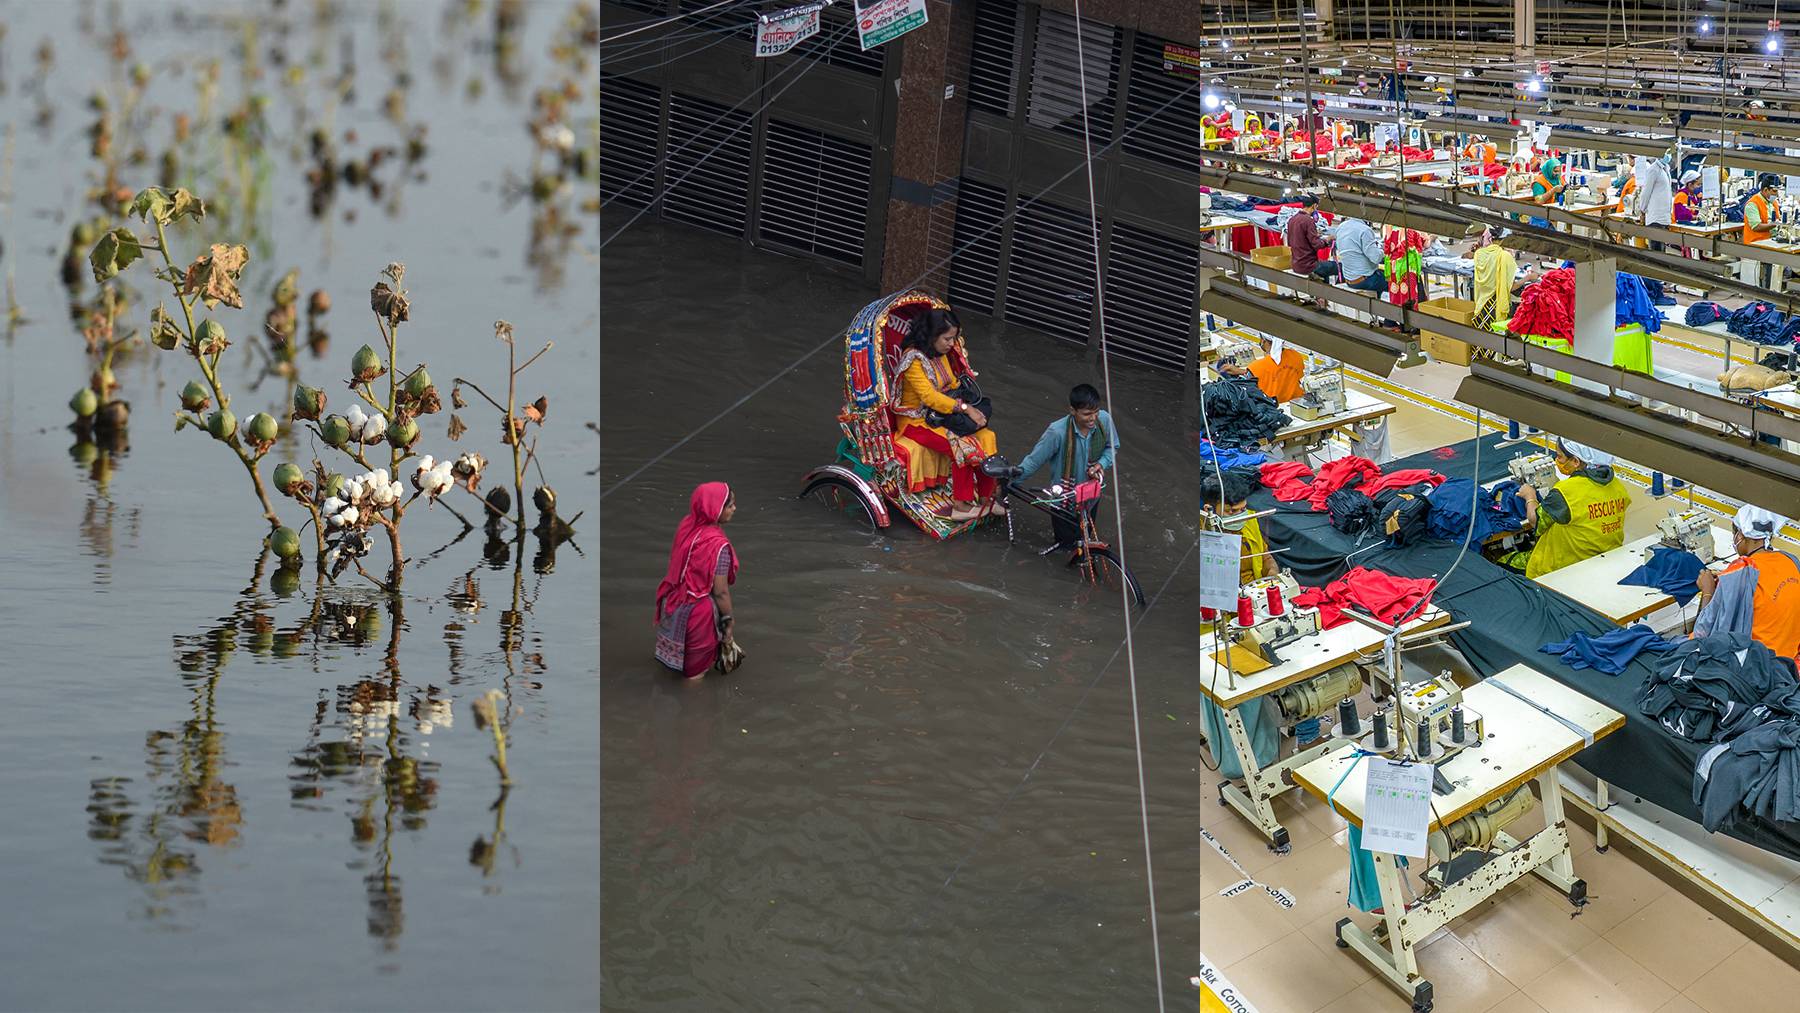 Left to right: flooding affects a cotton field in Pakistan; waterlogged streets in Dhaka, Bangladesh following Cyclone Sitrang; women working in a garment factory in Bangladesh